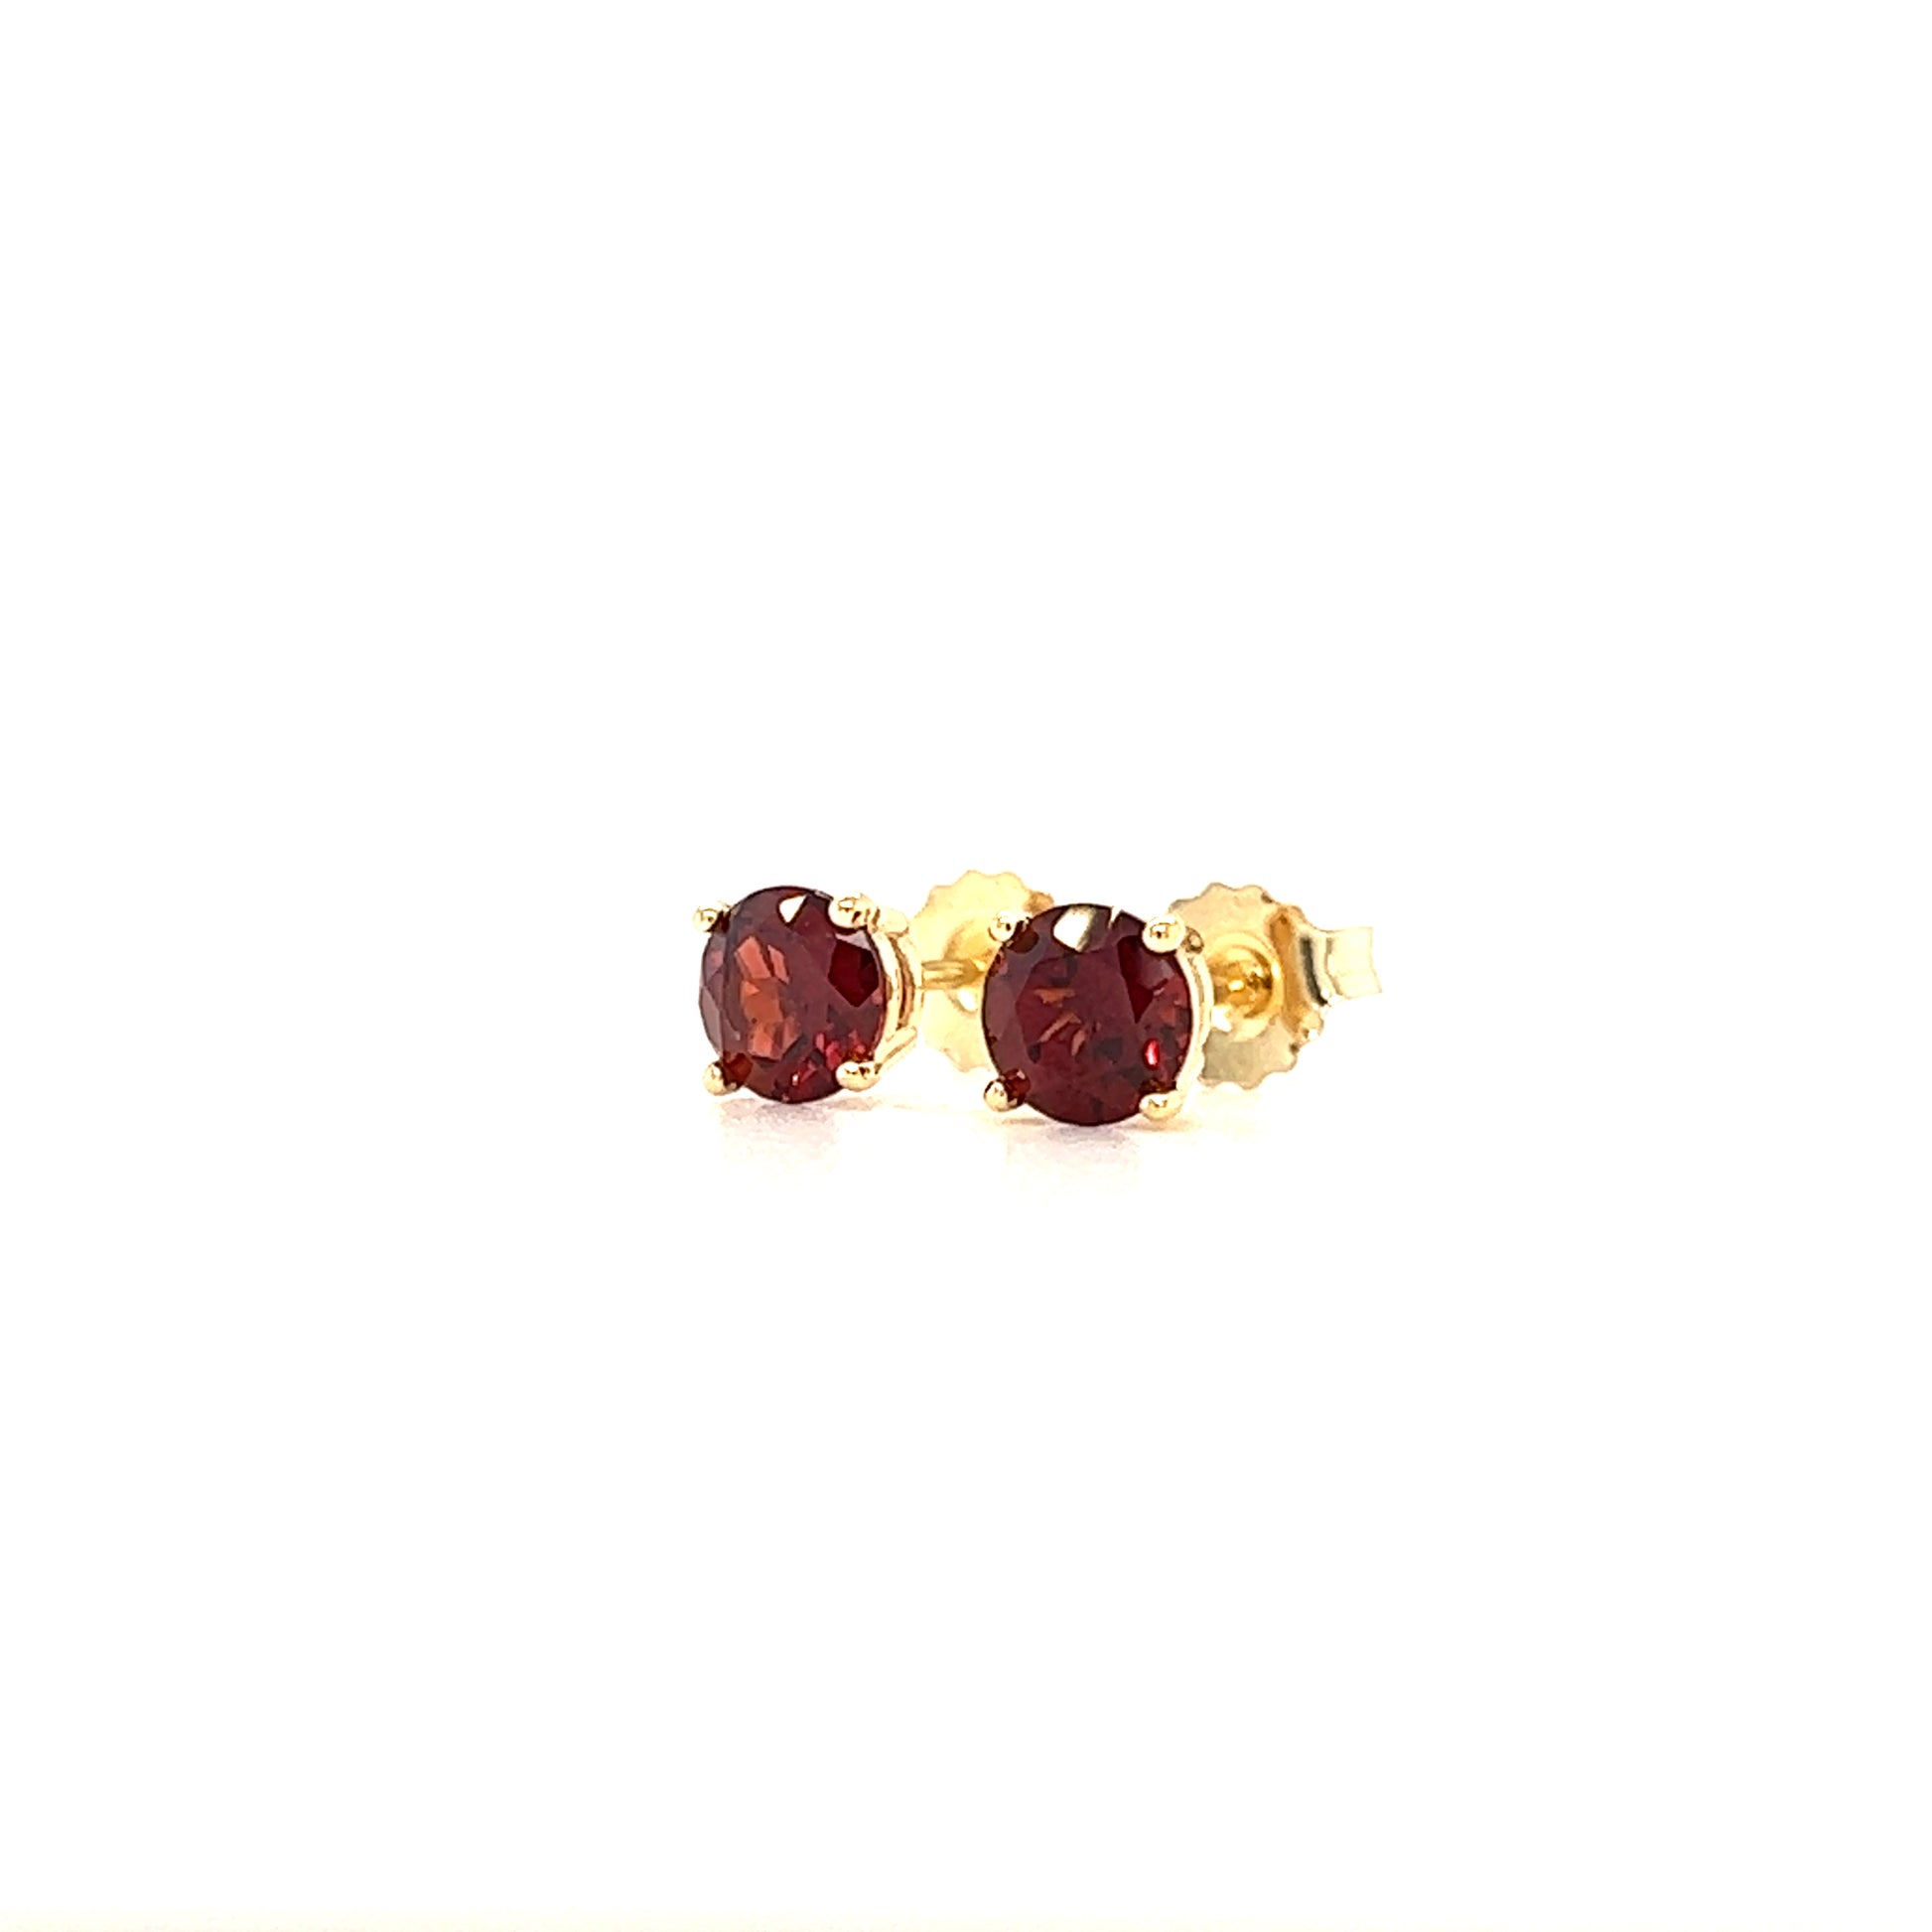 Round Garnet 5mm Stud Earrings in 14K Yellow Gold Right Side View